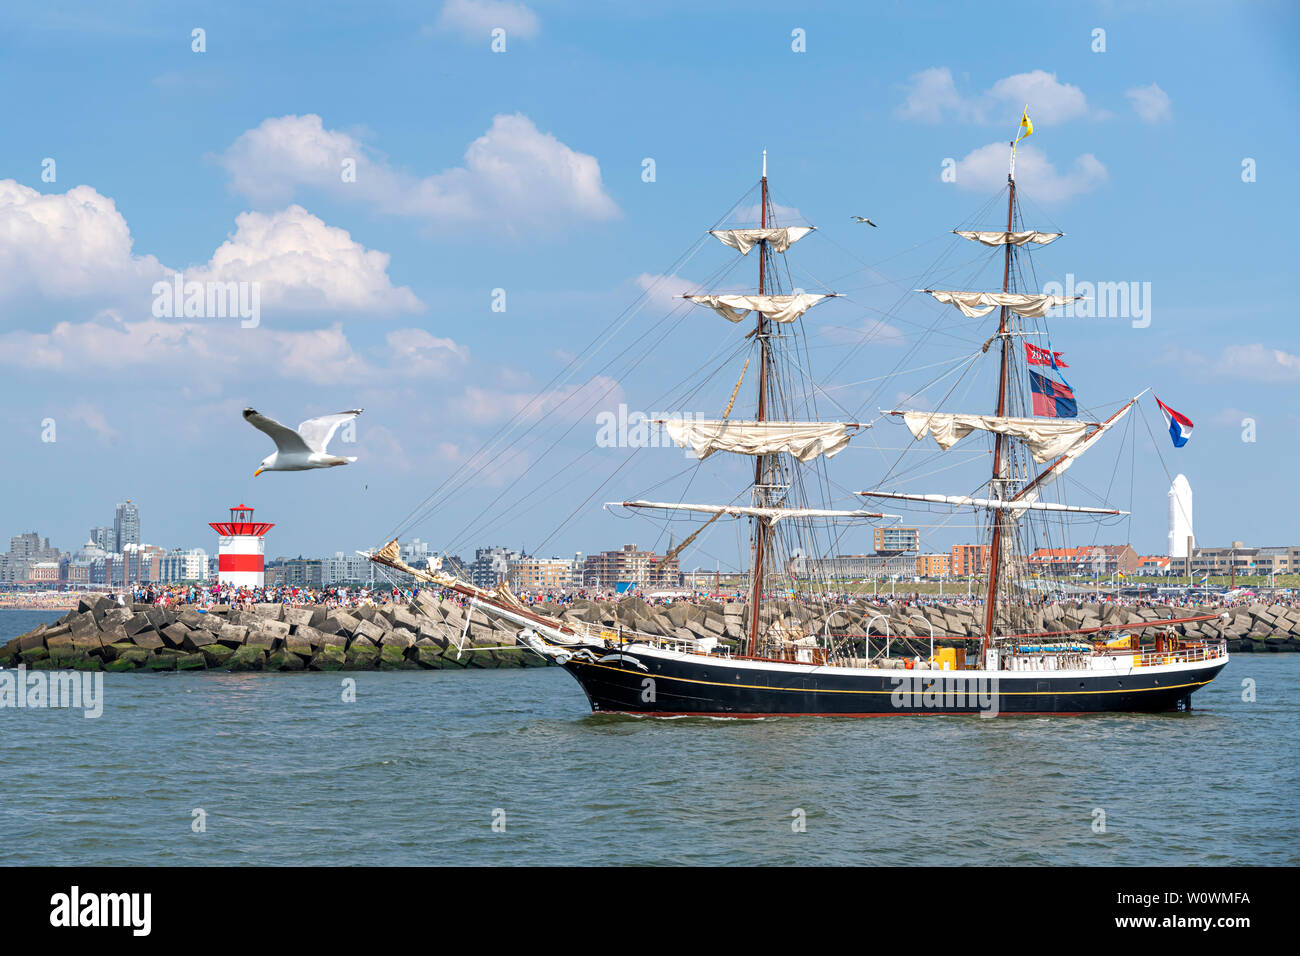 A seagull flying beside an antique tall ship, vessel leaving the harbor of The Hague, Scheveningen under a warm sunset and golden sky Stock Photo